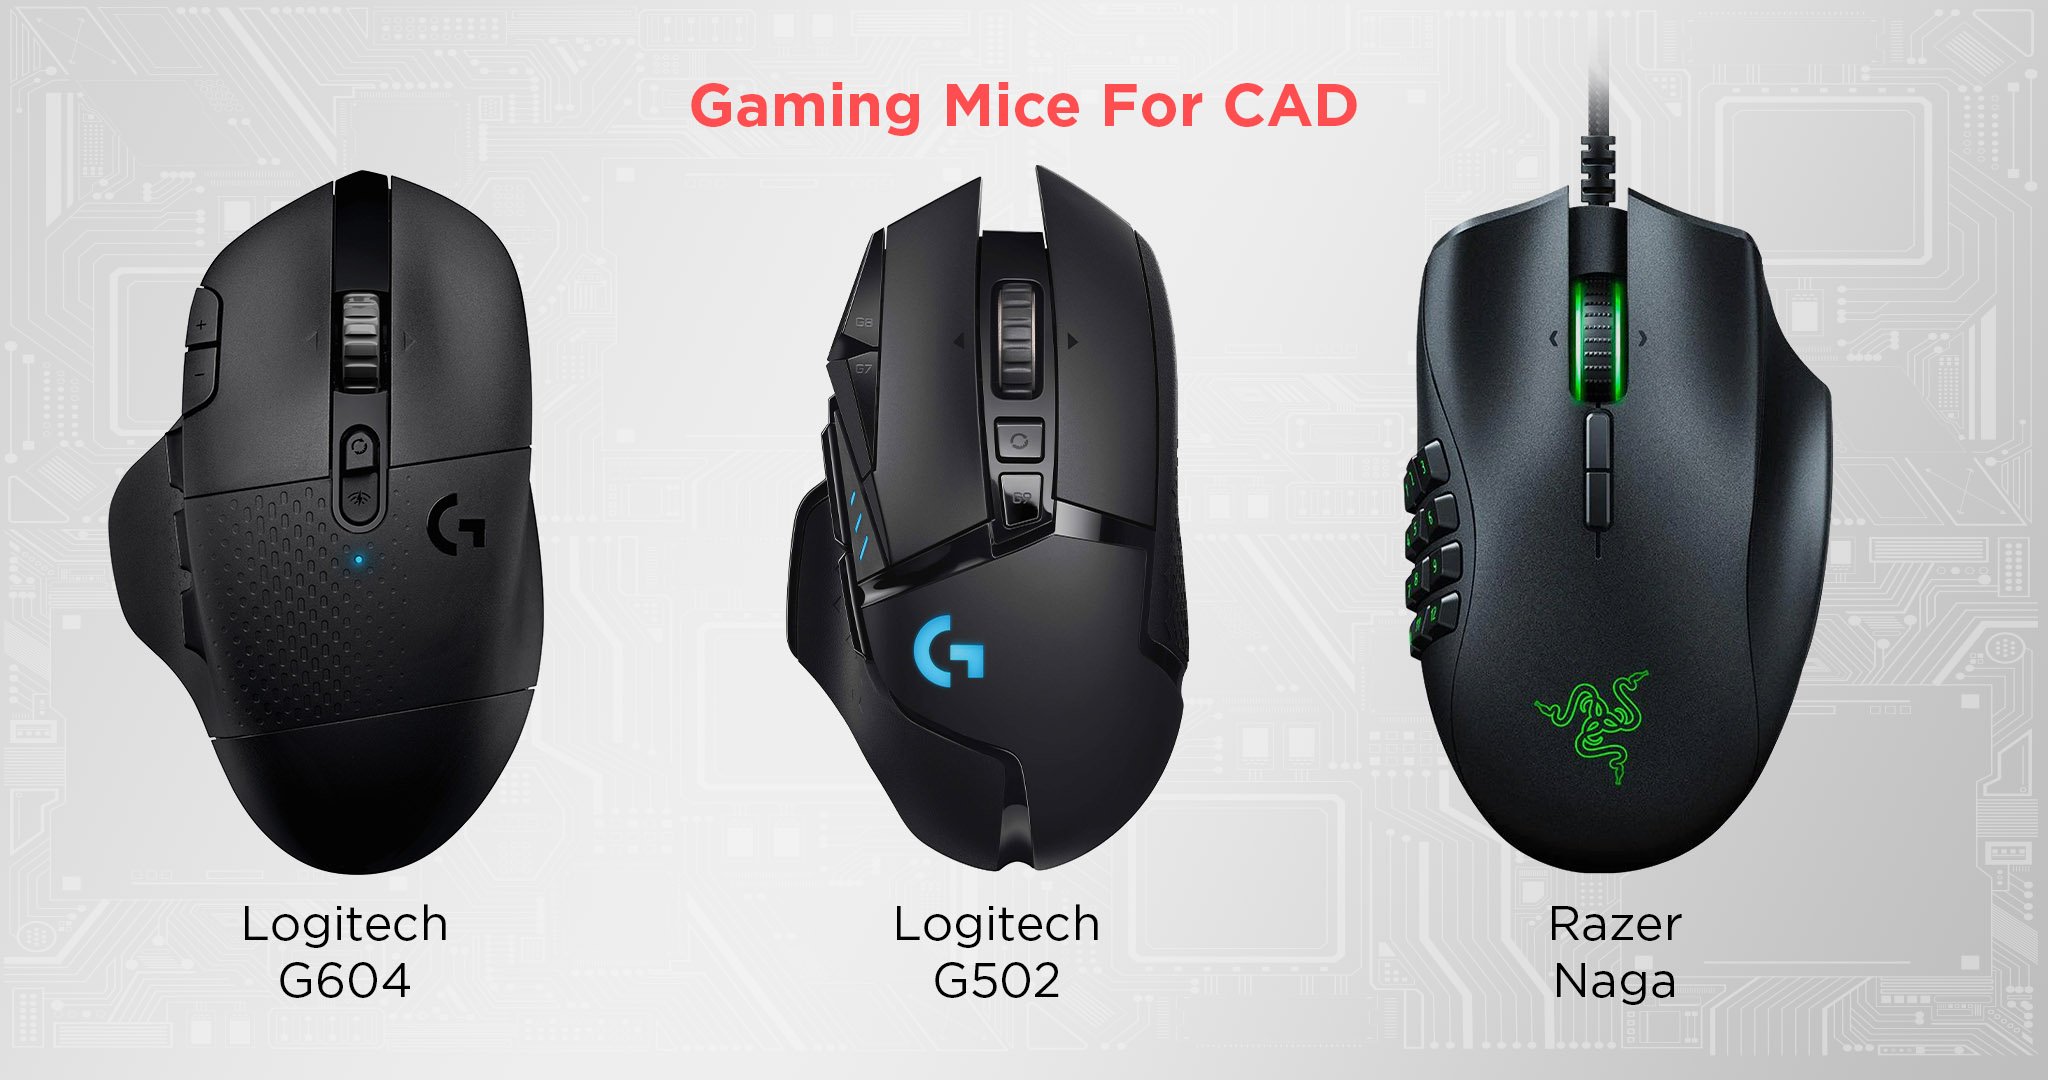 Gaming Mice For CAD